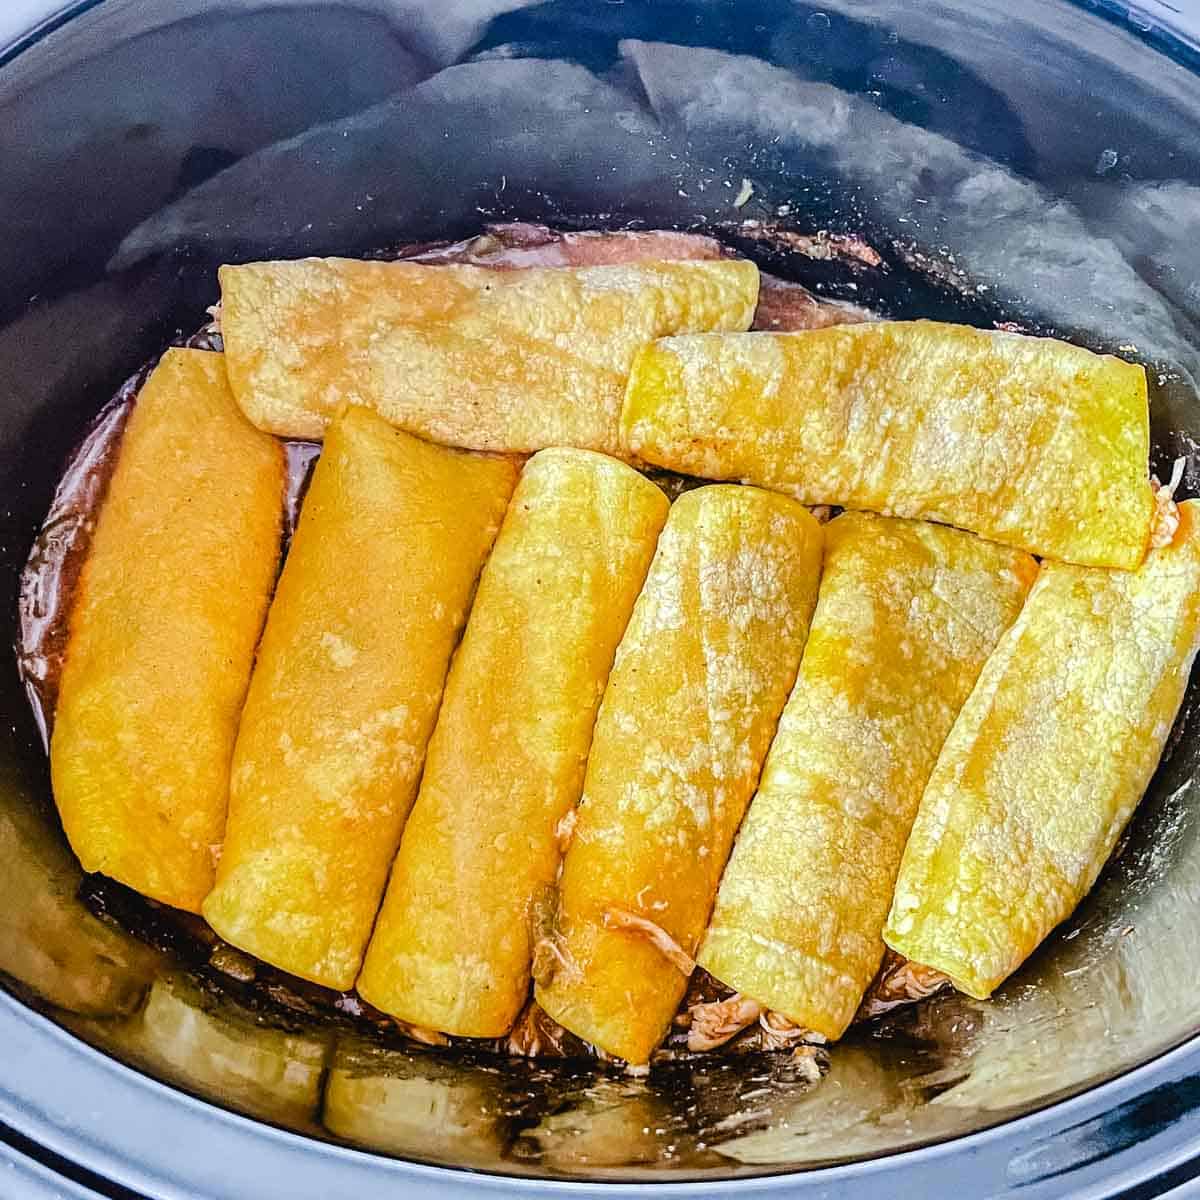 The rolled enchiladas are added back to the slow cooker.